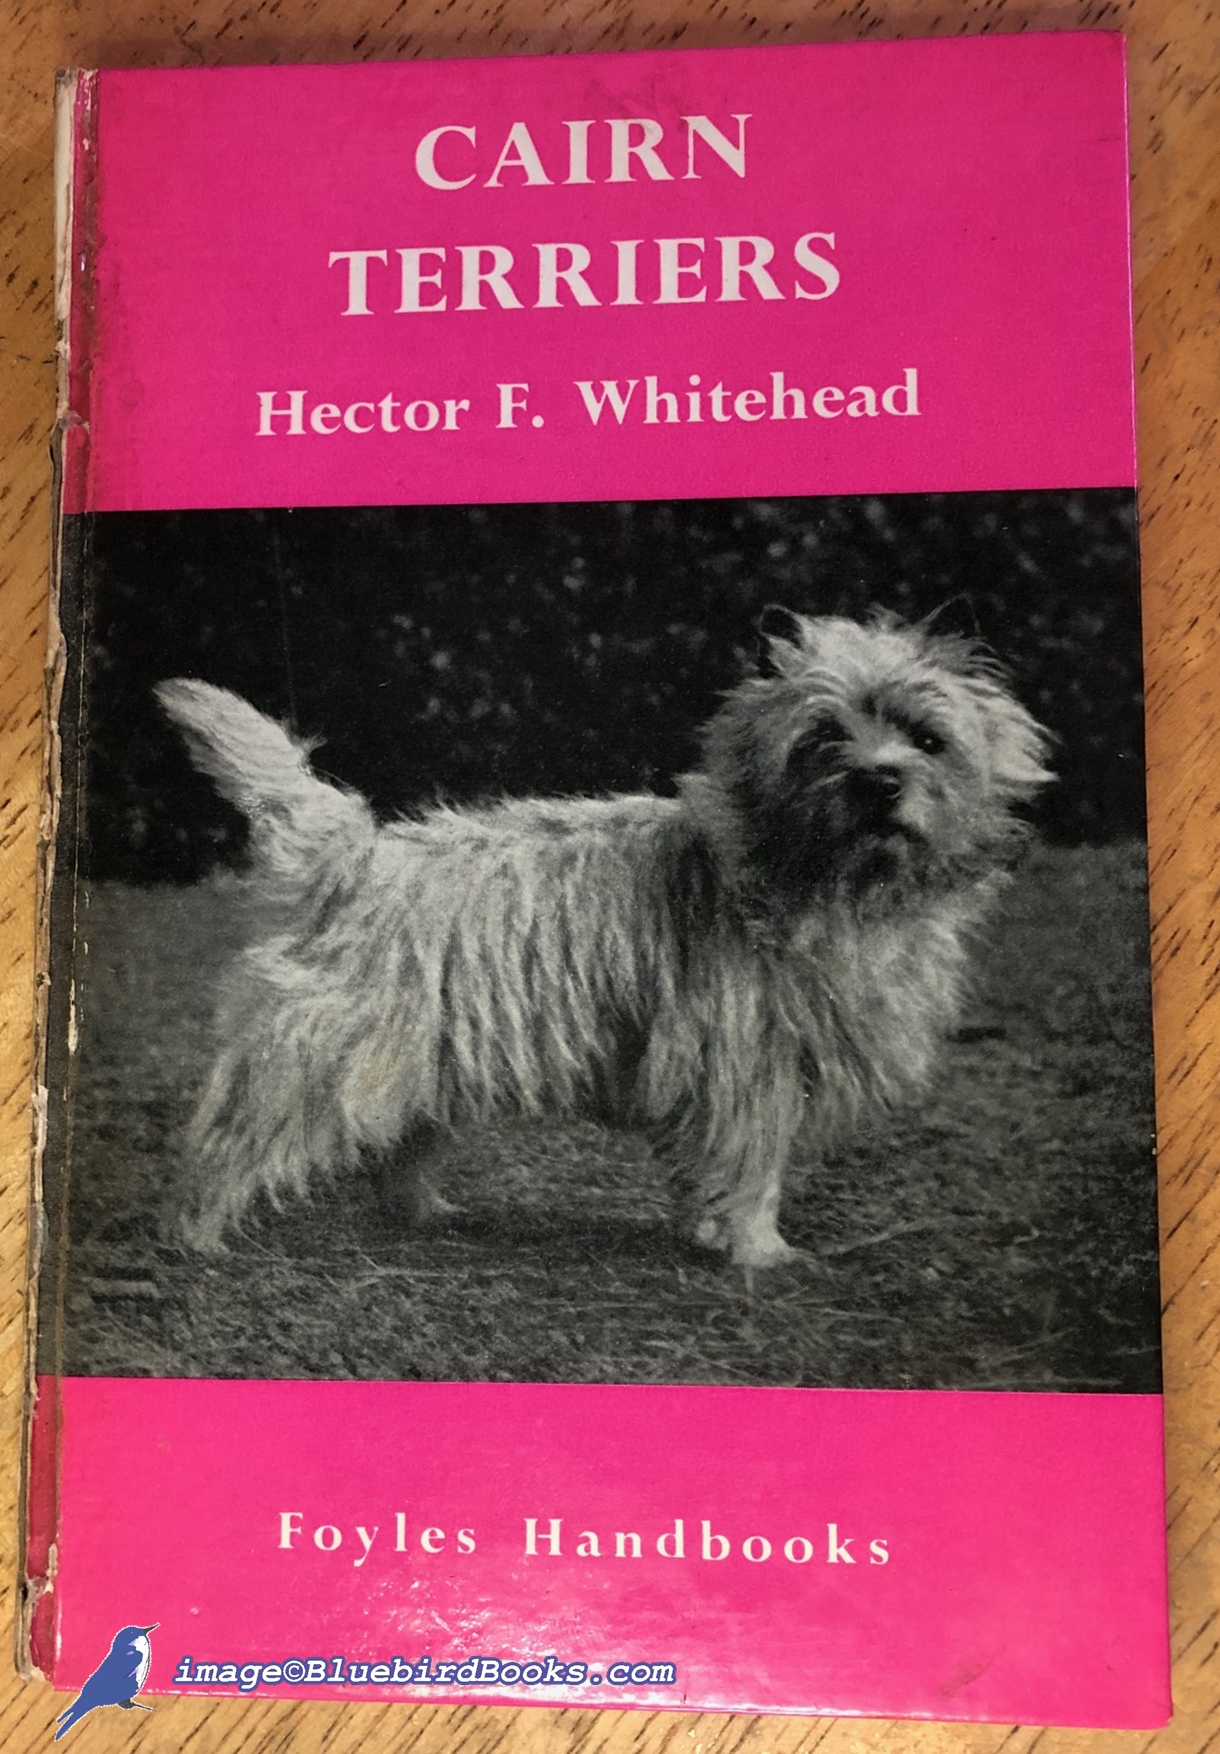 WHITEHEAD, LT. COL. HECTOR F. - Cairn Terriers